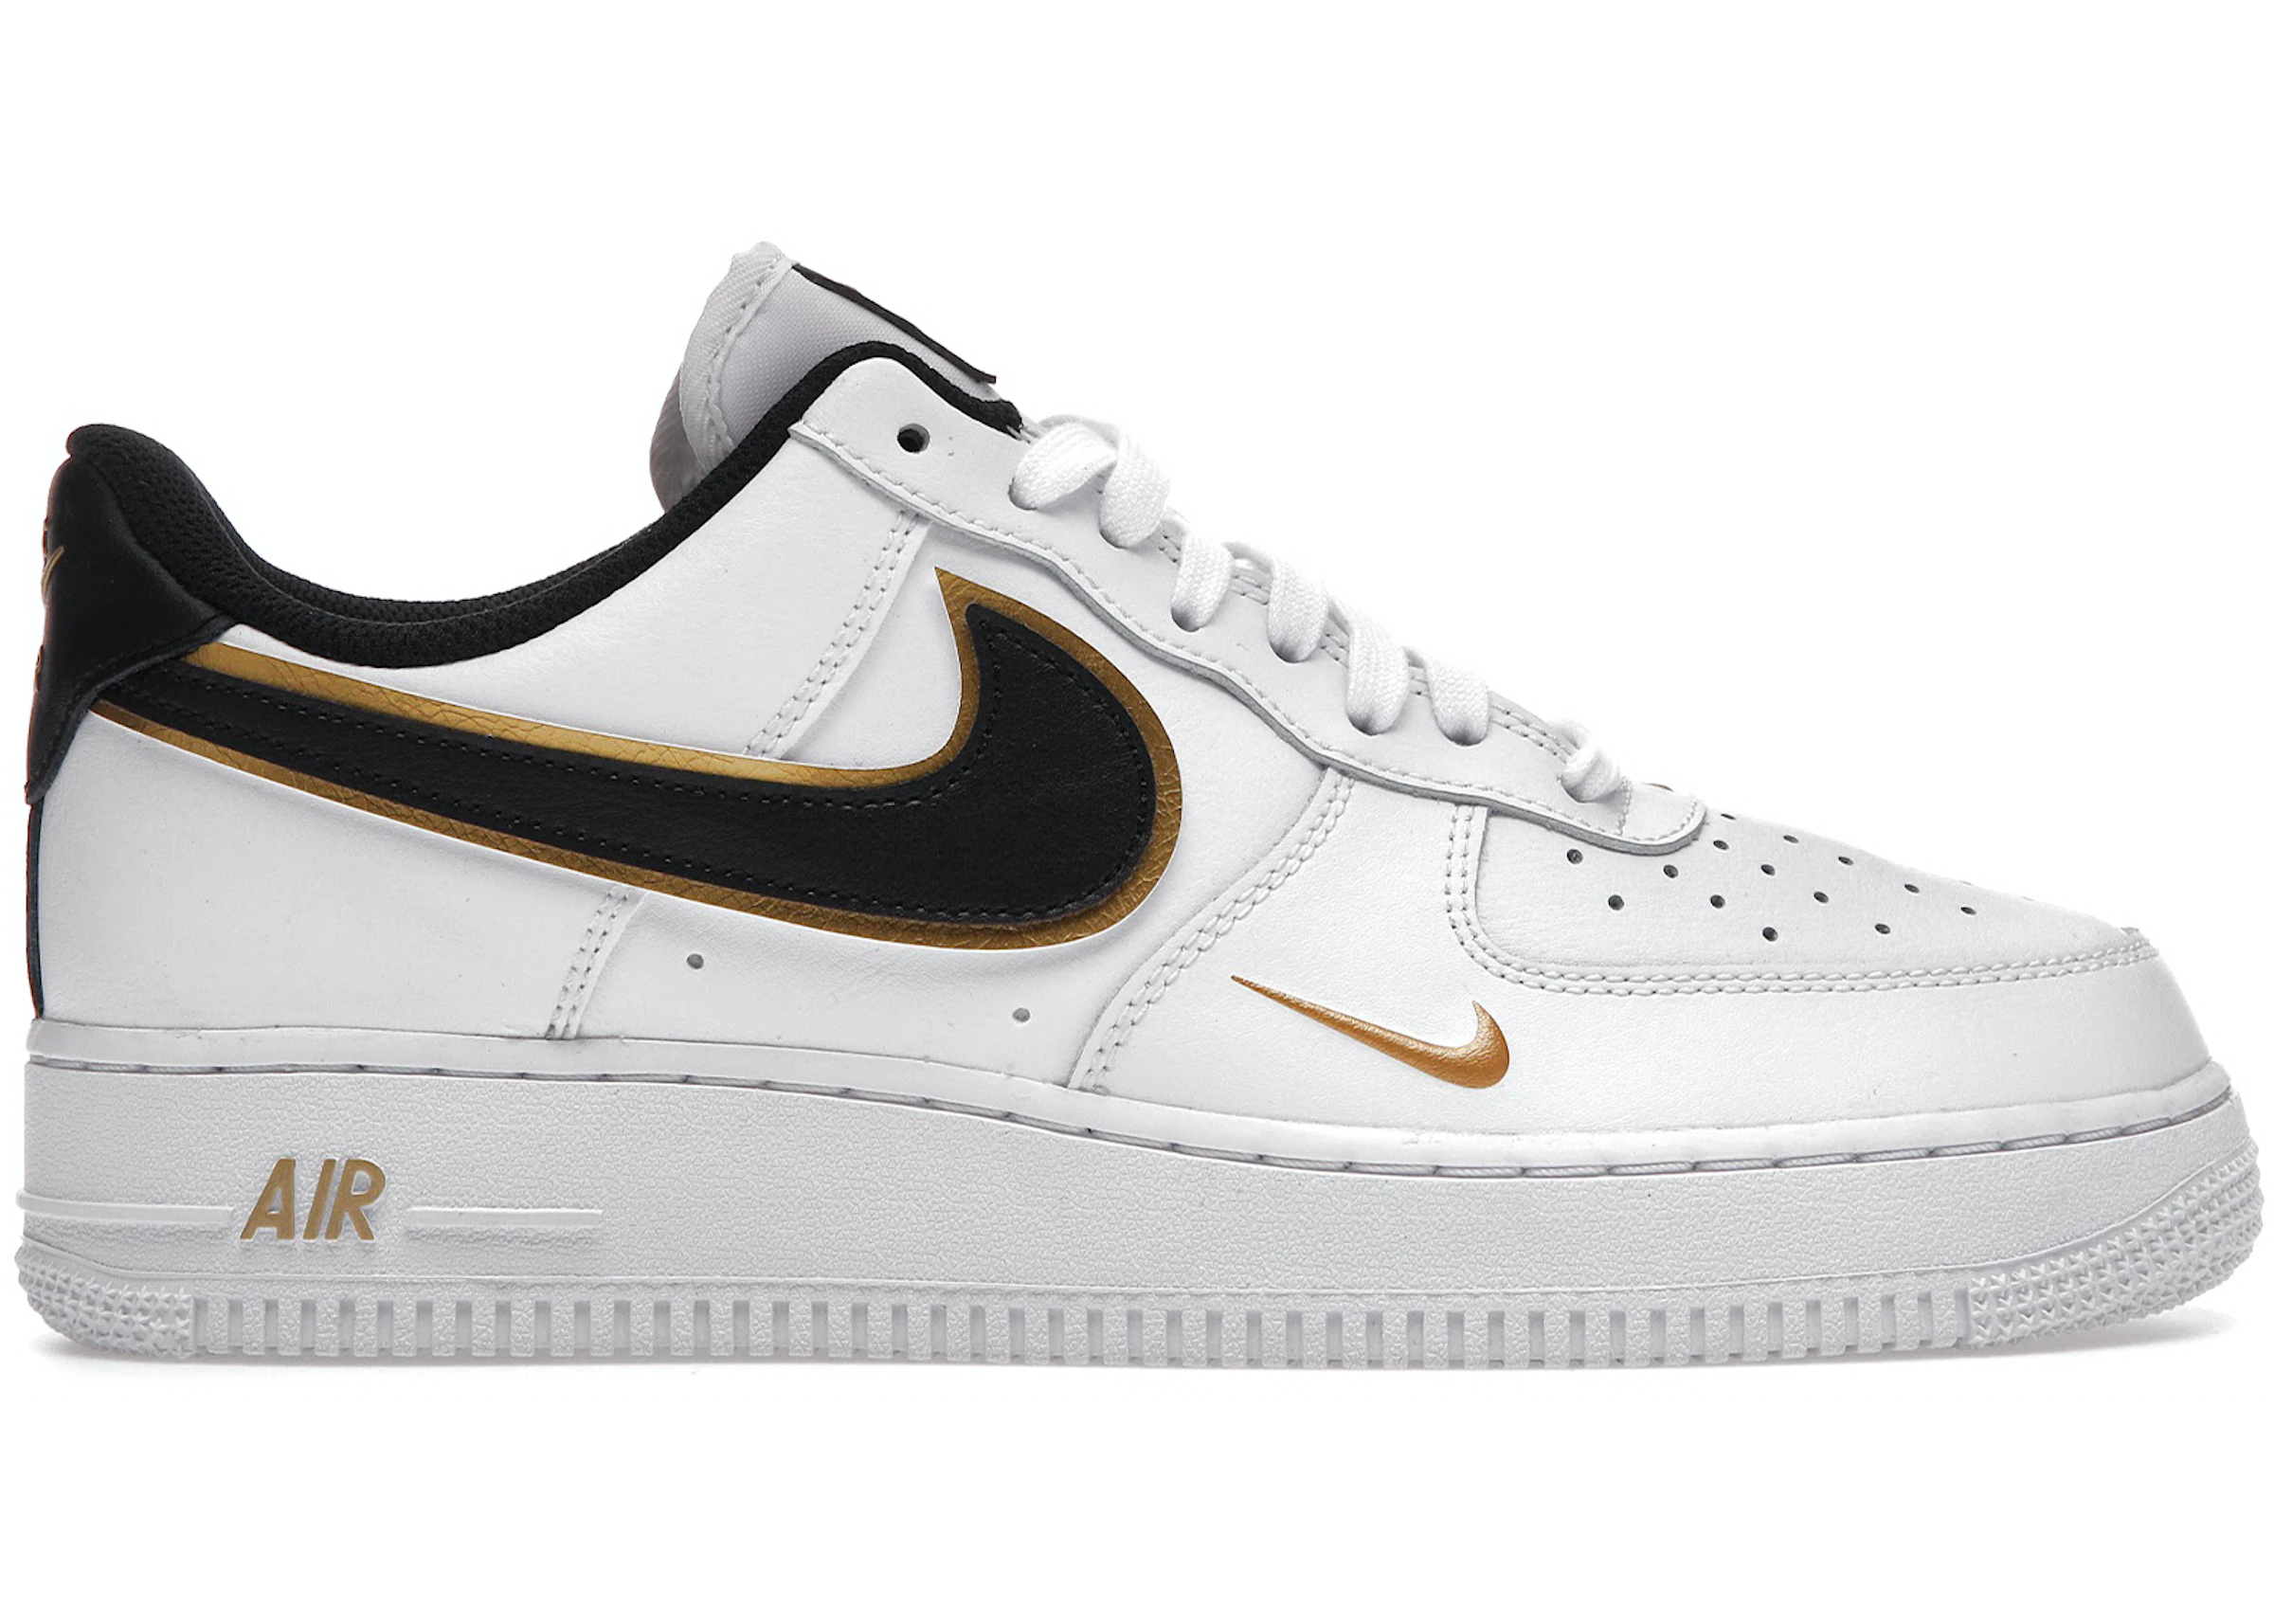 Whose See you monitor Nike Air Force 1 Low '07 LV8 Double Swoosh White Metallic Gold - DA8481-100  - US